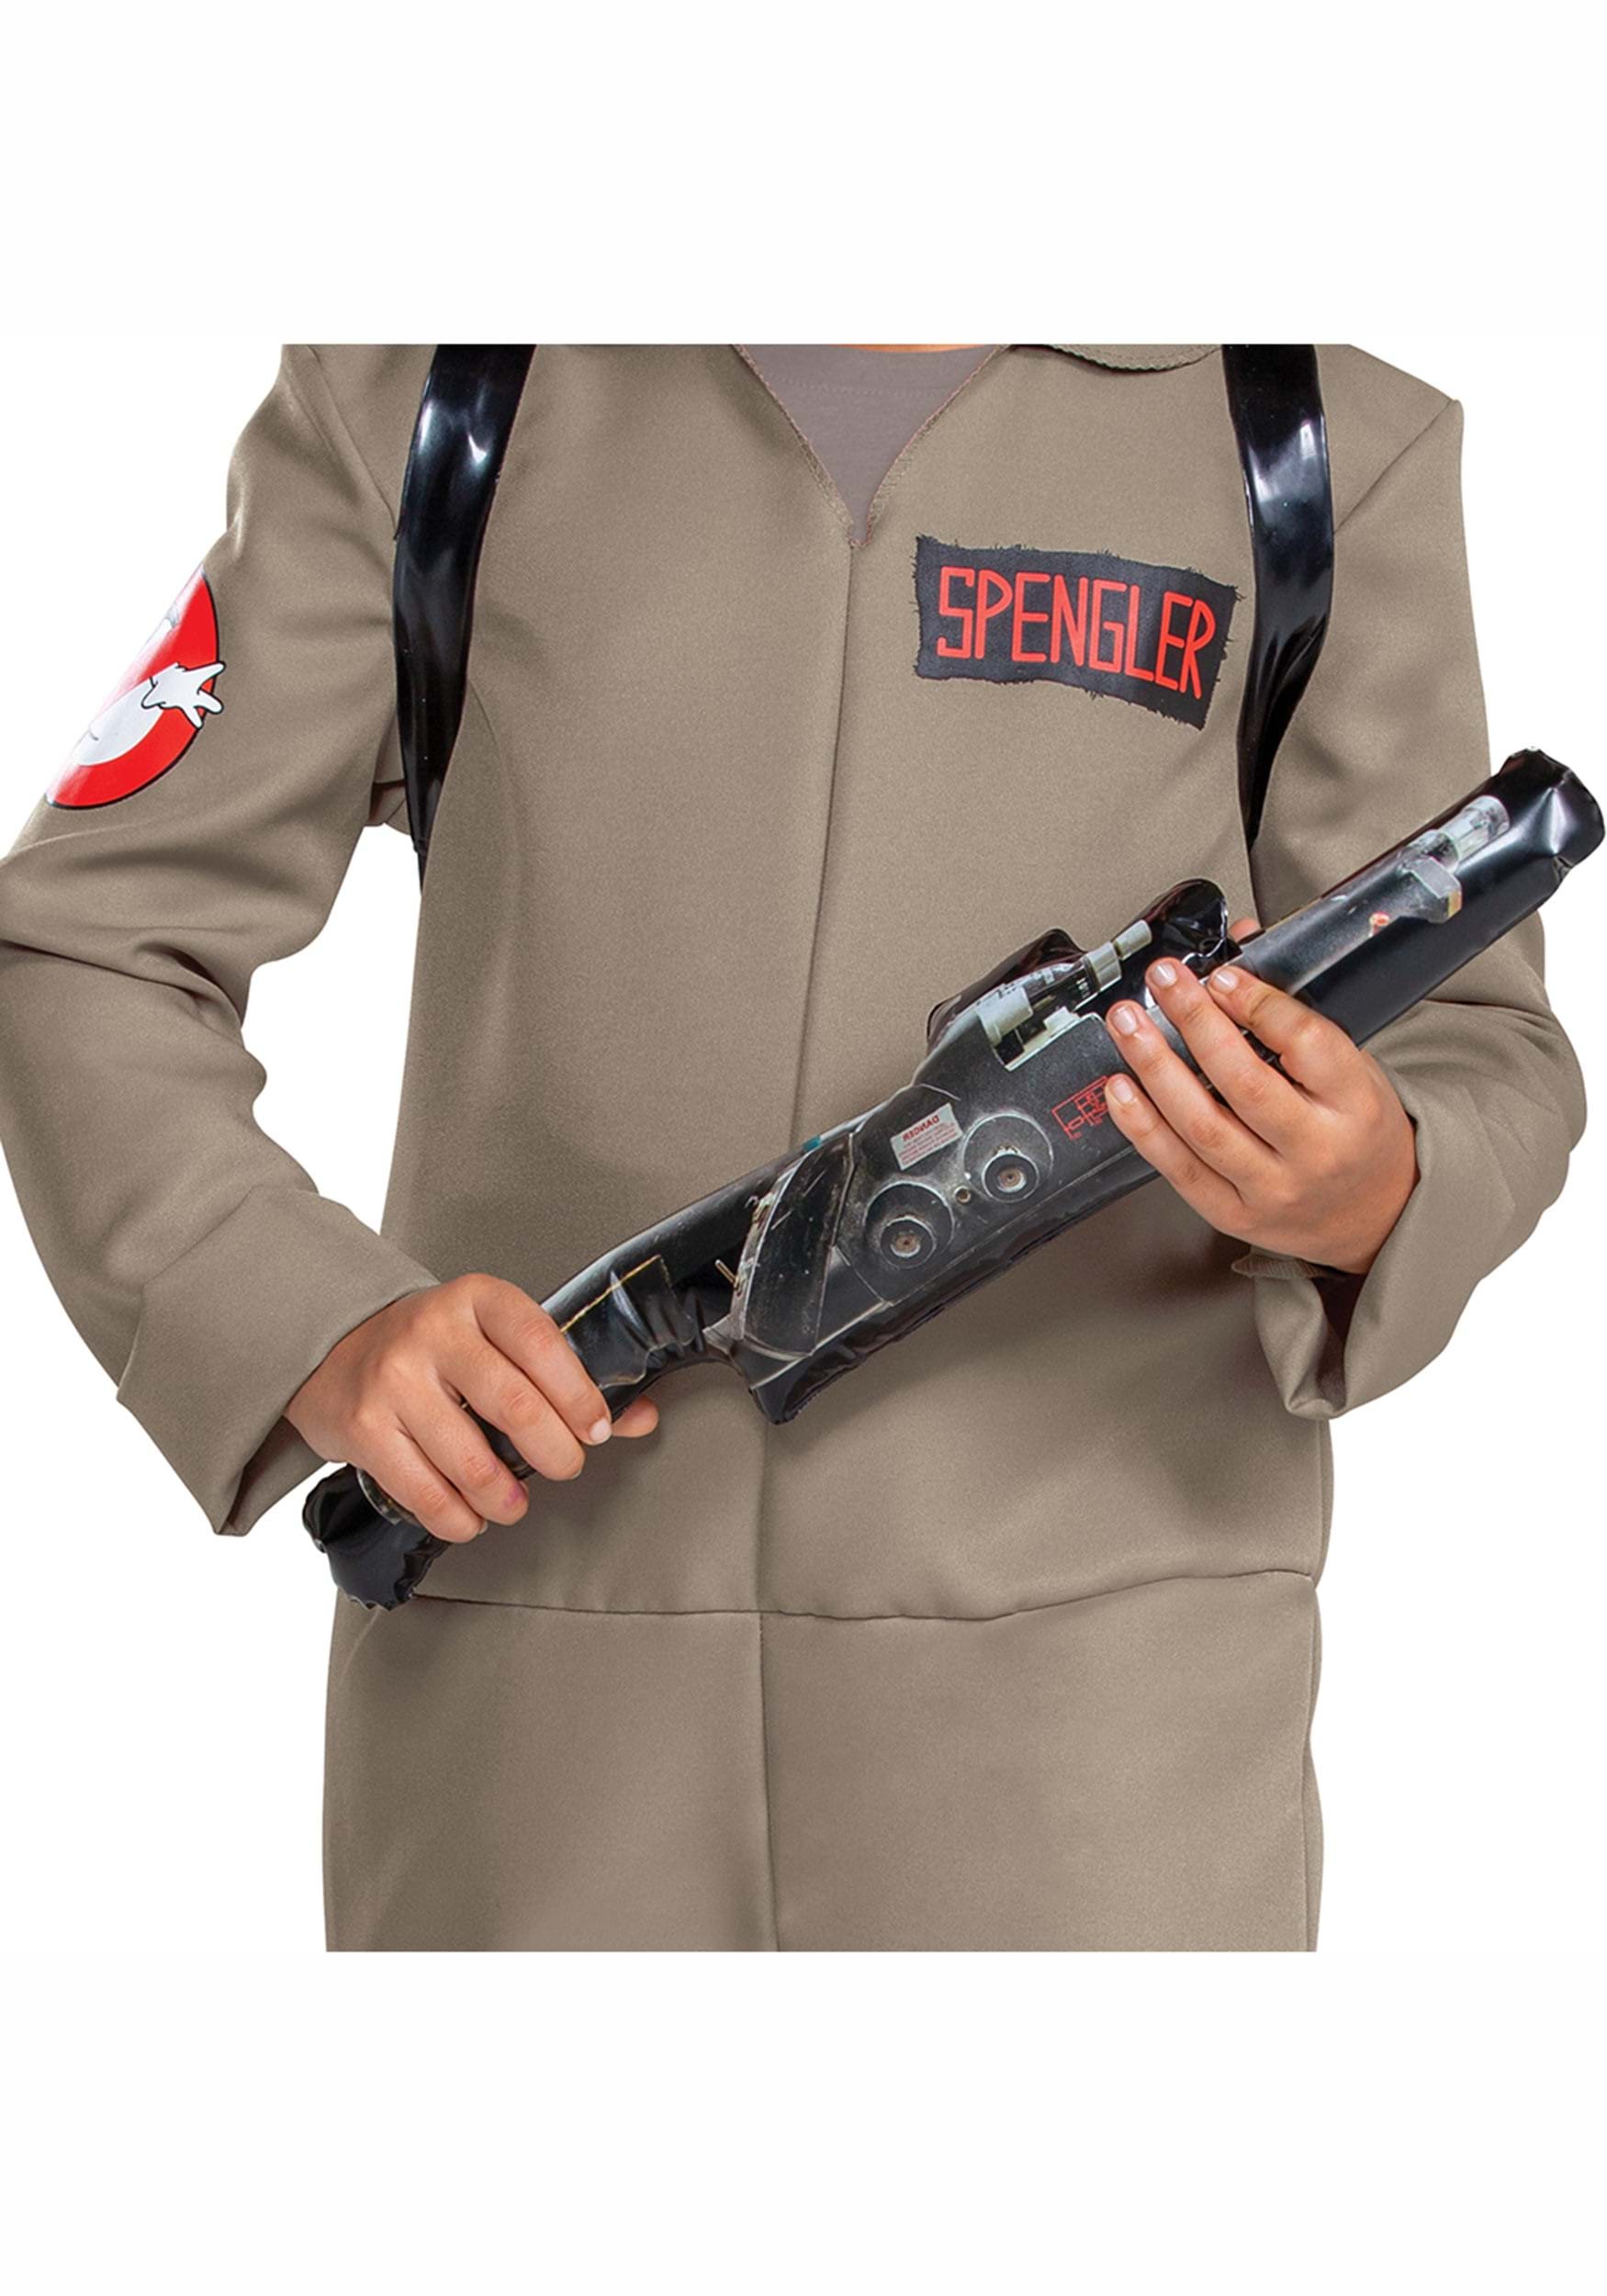 Kids Ghostbusters Inflatable Proton Pack